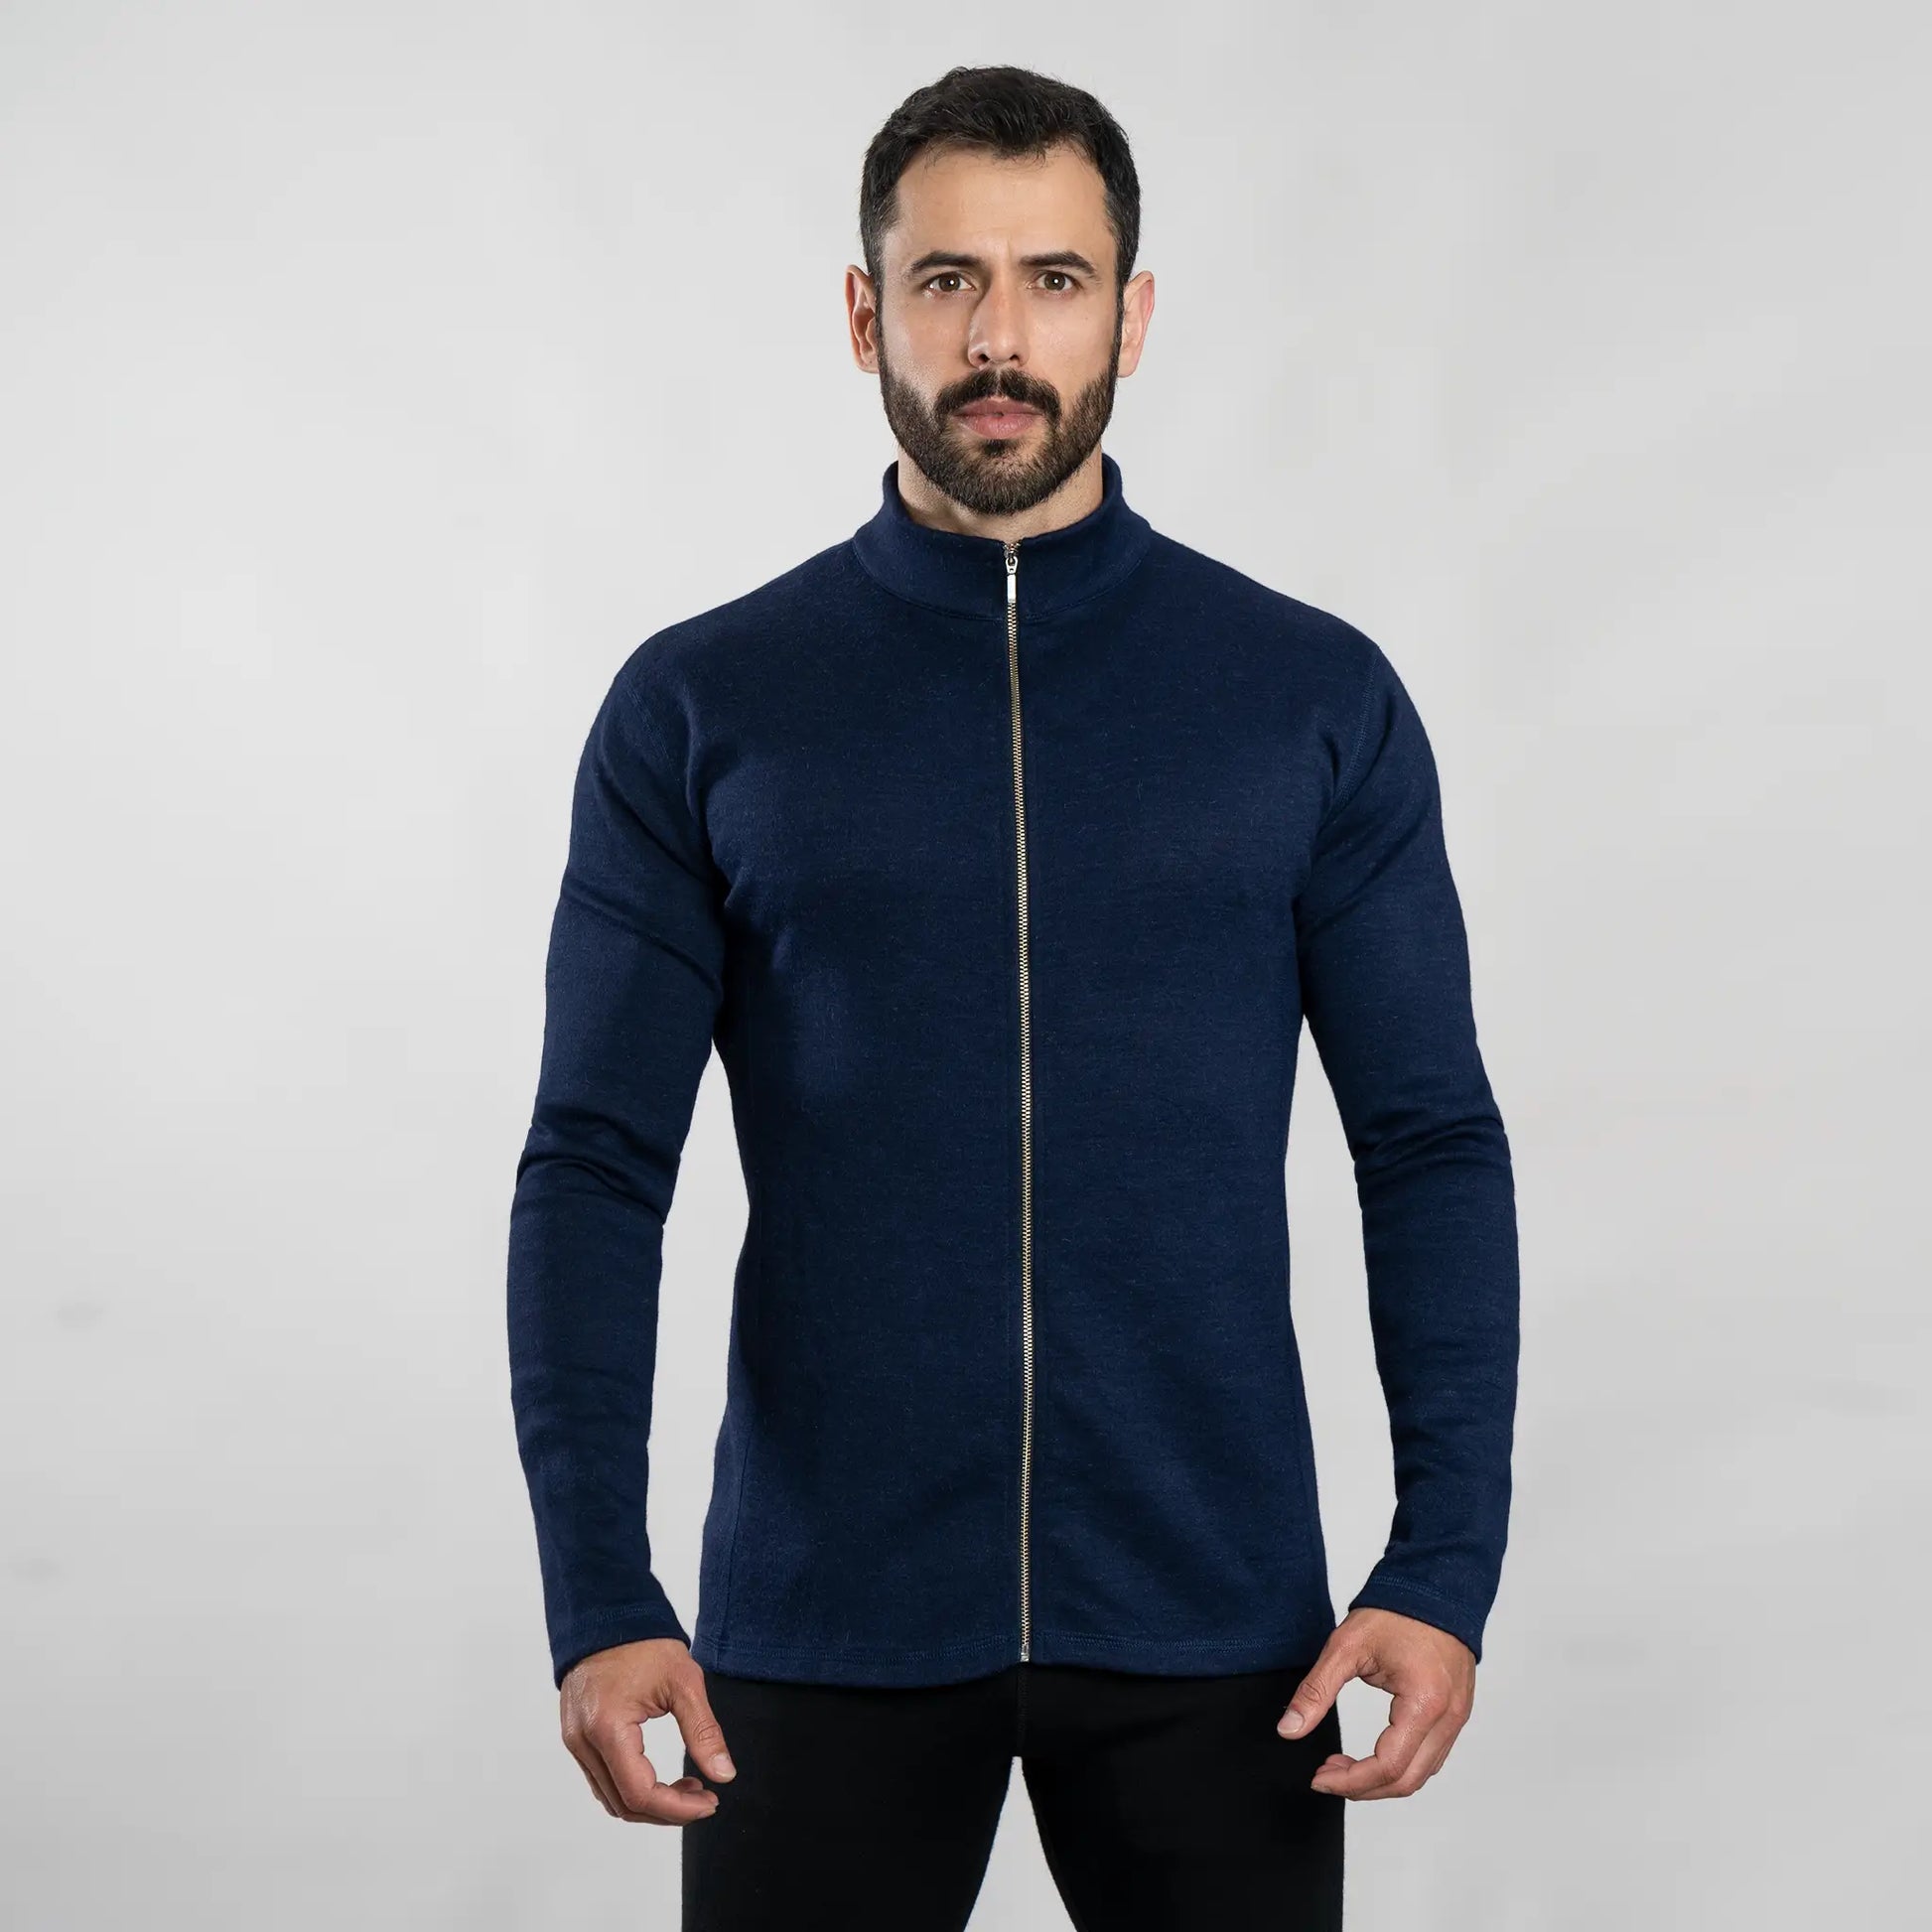 Performance Full Zip Mid Layer - Charcoal